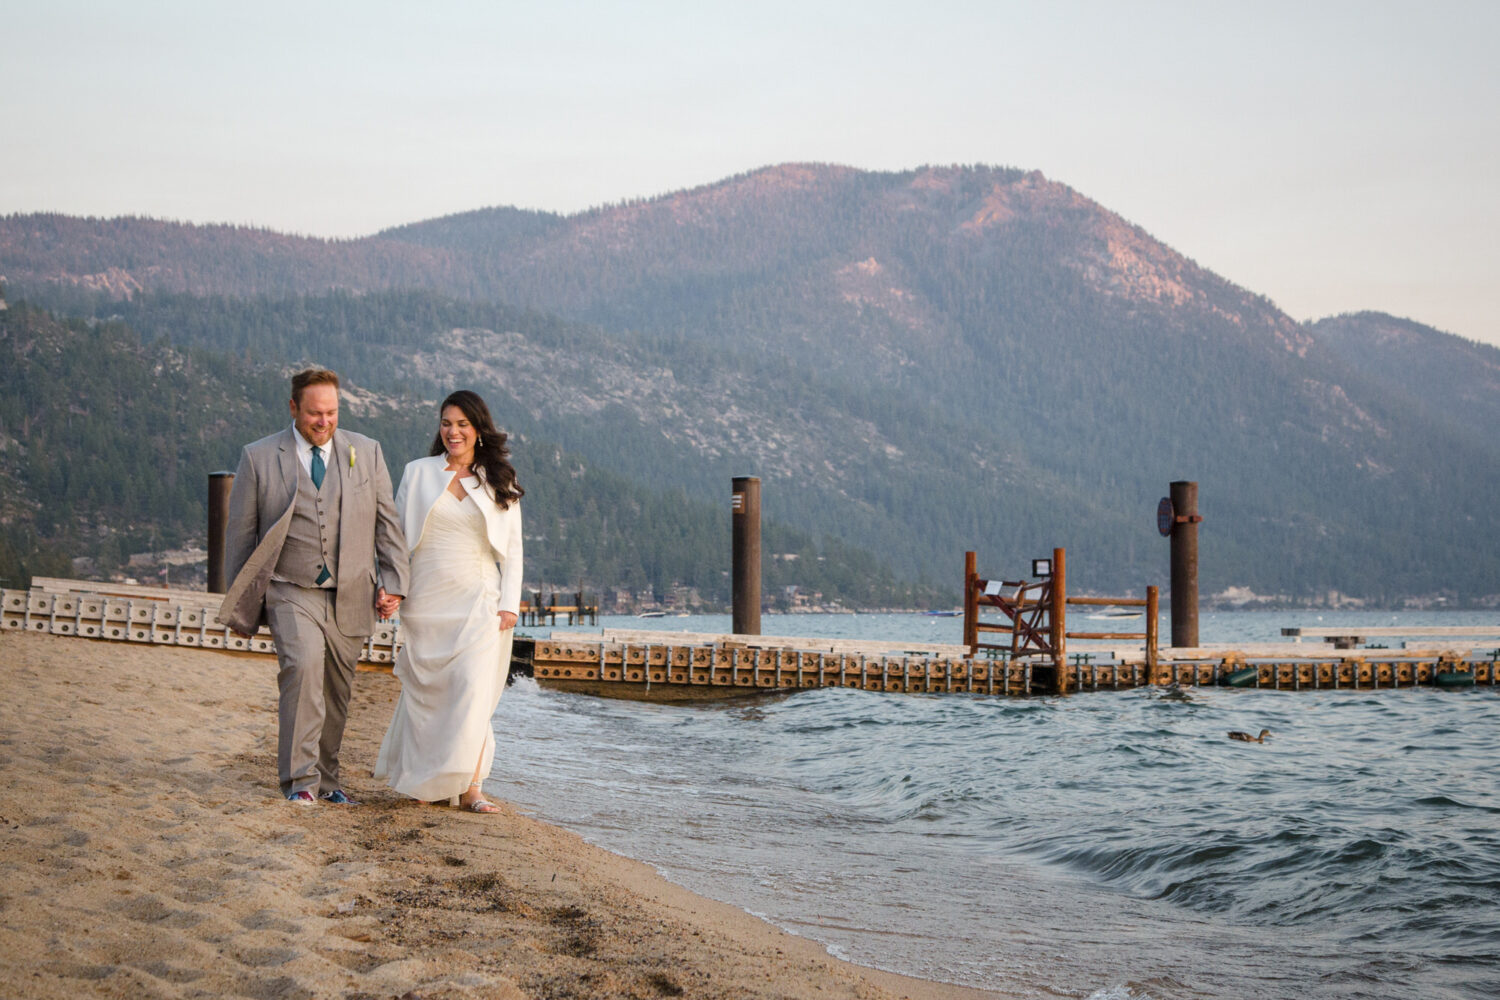 Sunset photos on the beach after a wedding at Hyatt Lake Tahoe.